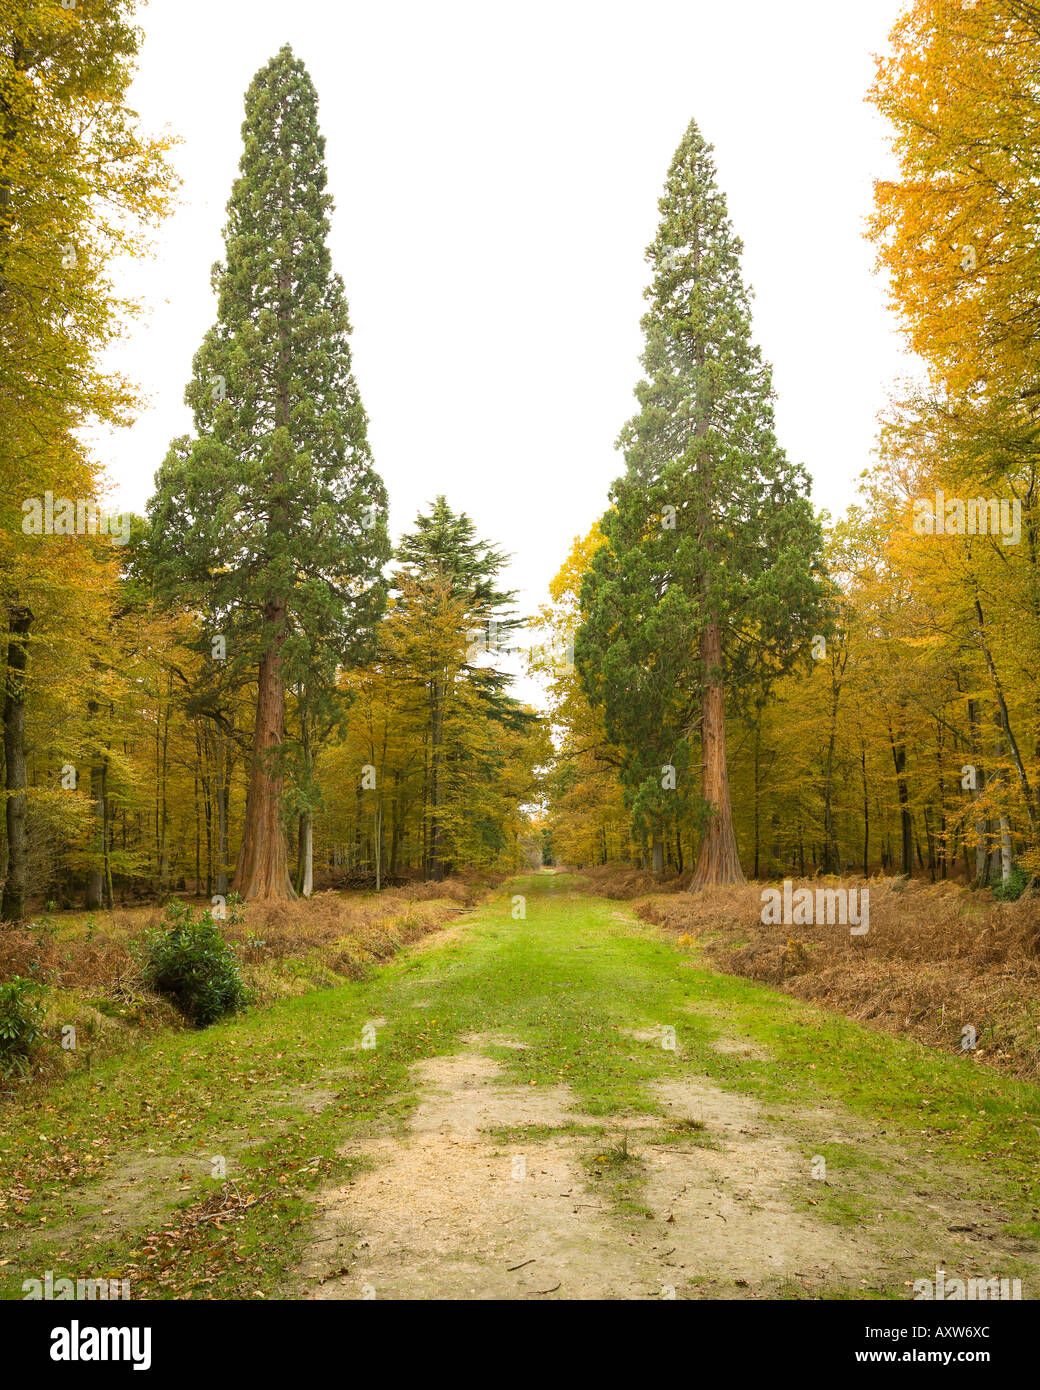 Two Giant Sequoia trees Black Water Arboretum New Forest Hampshire UK Stock Photo